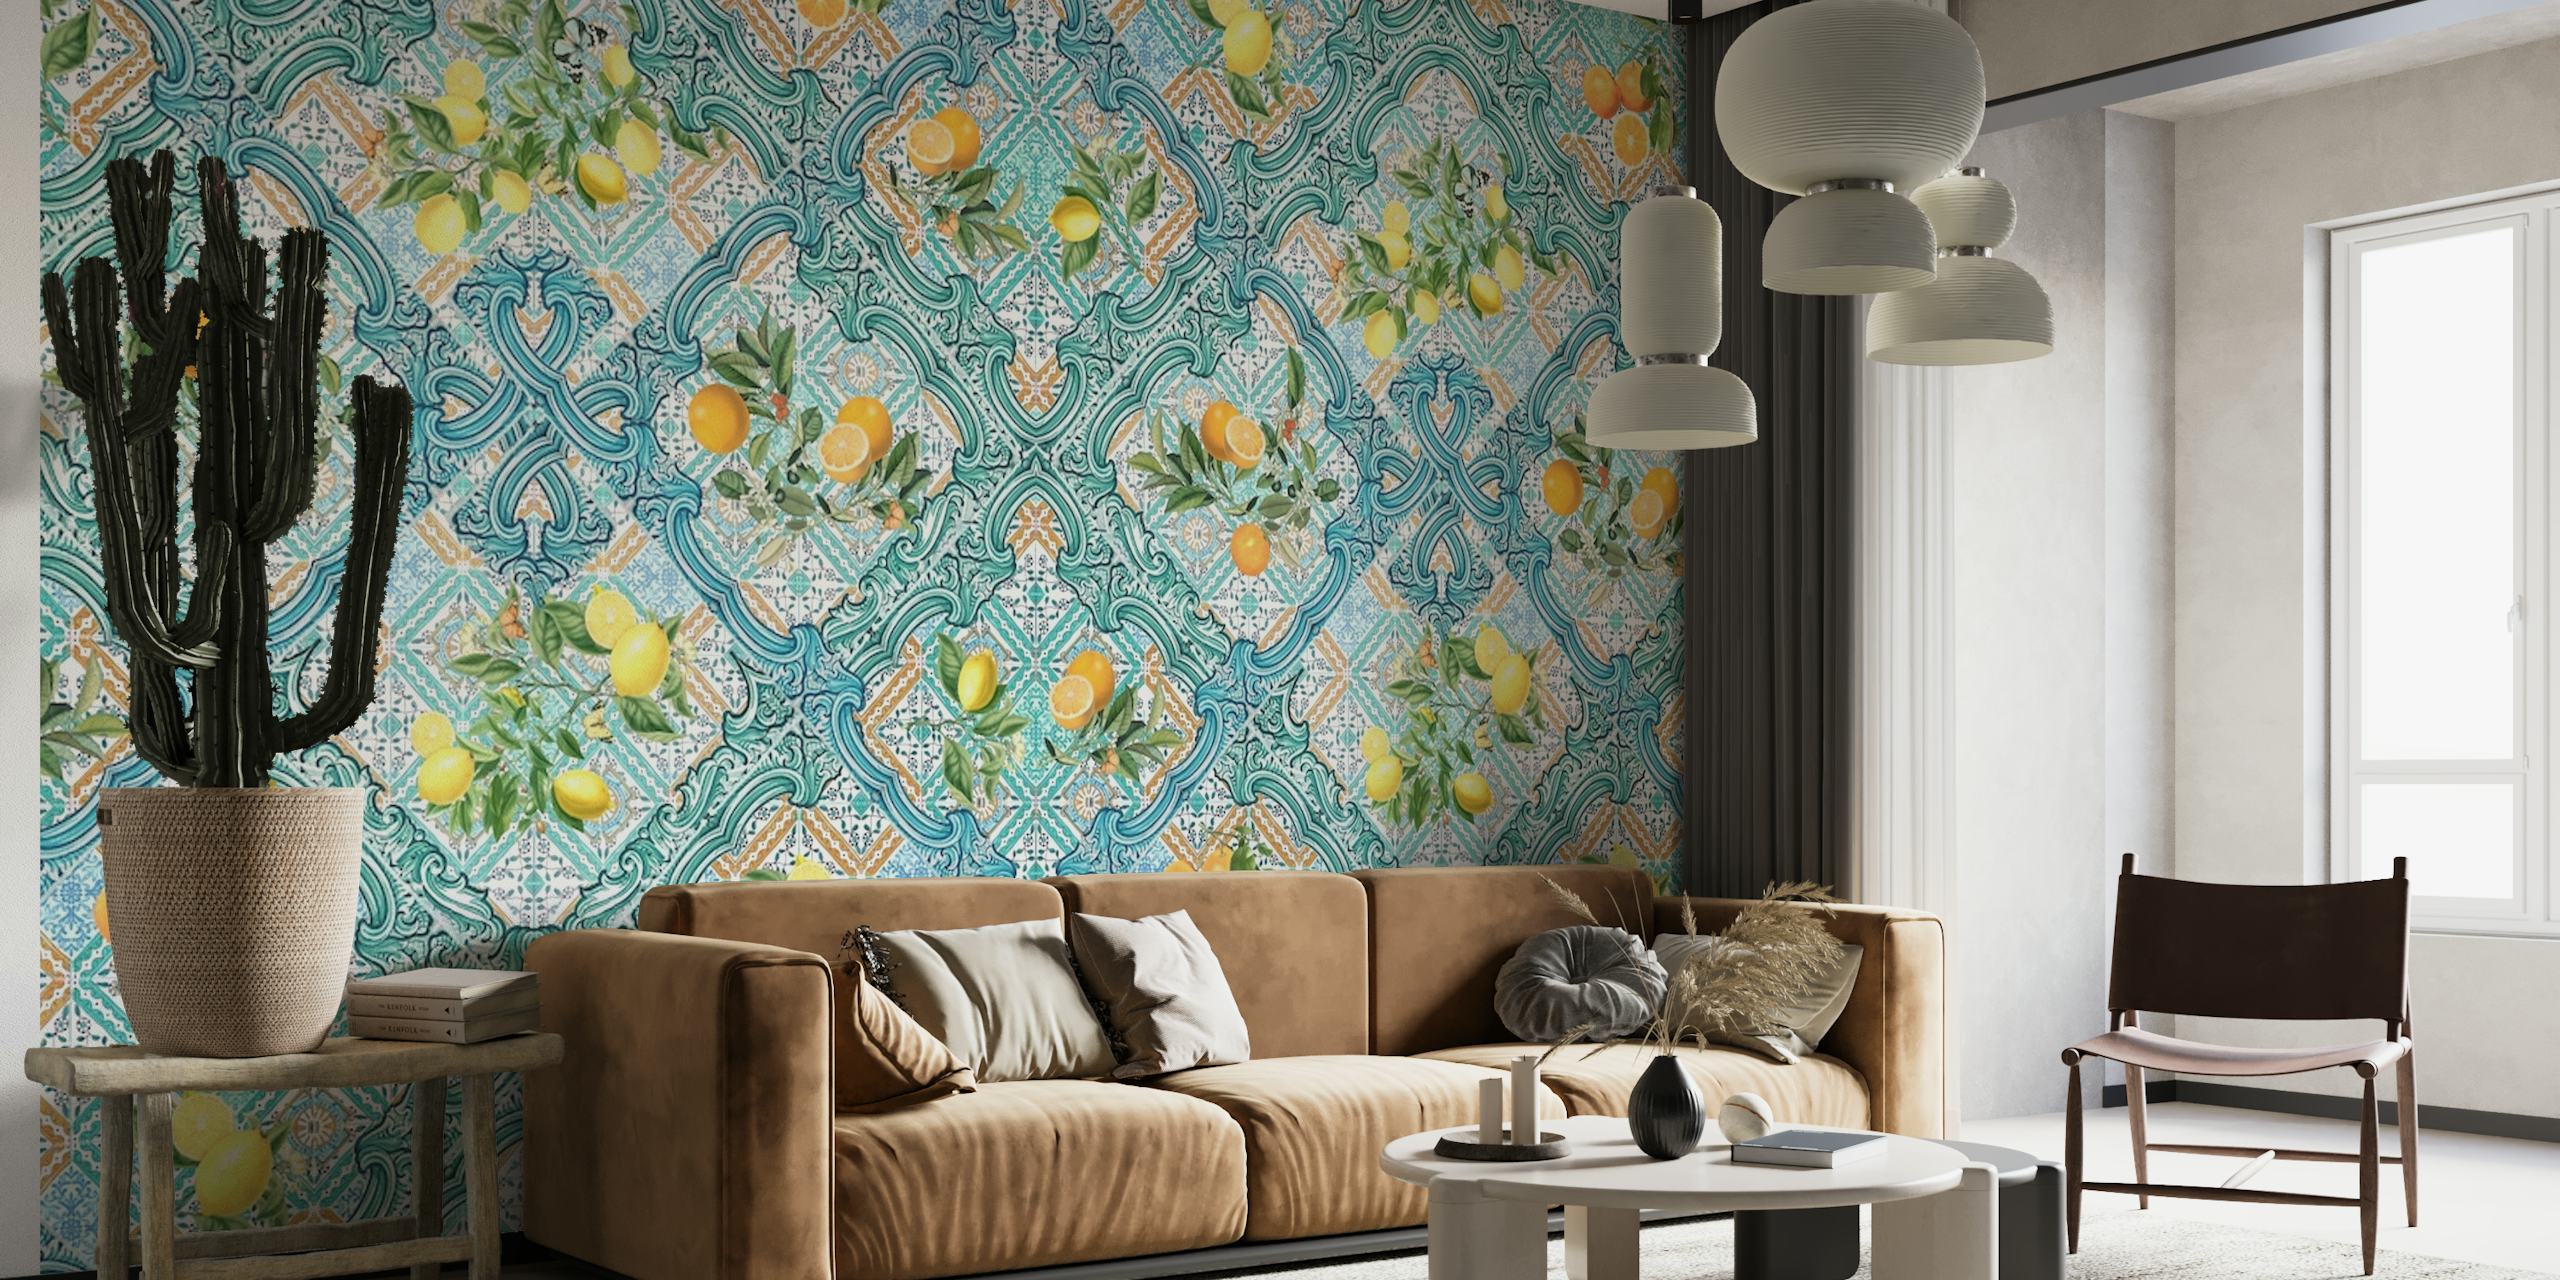 Teal geometric tiles with citrus fruits wall mural